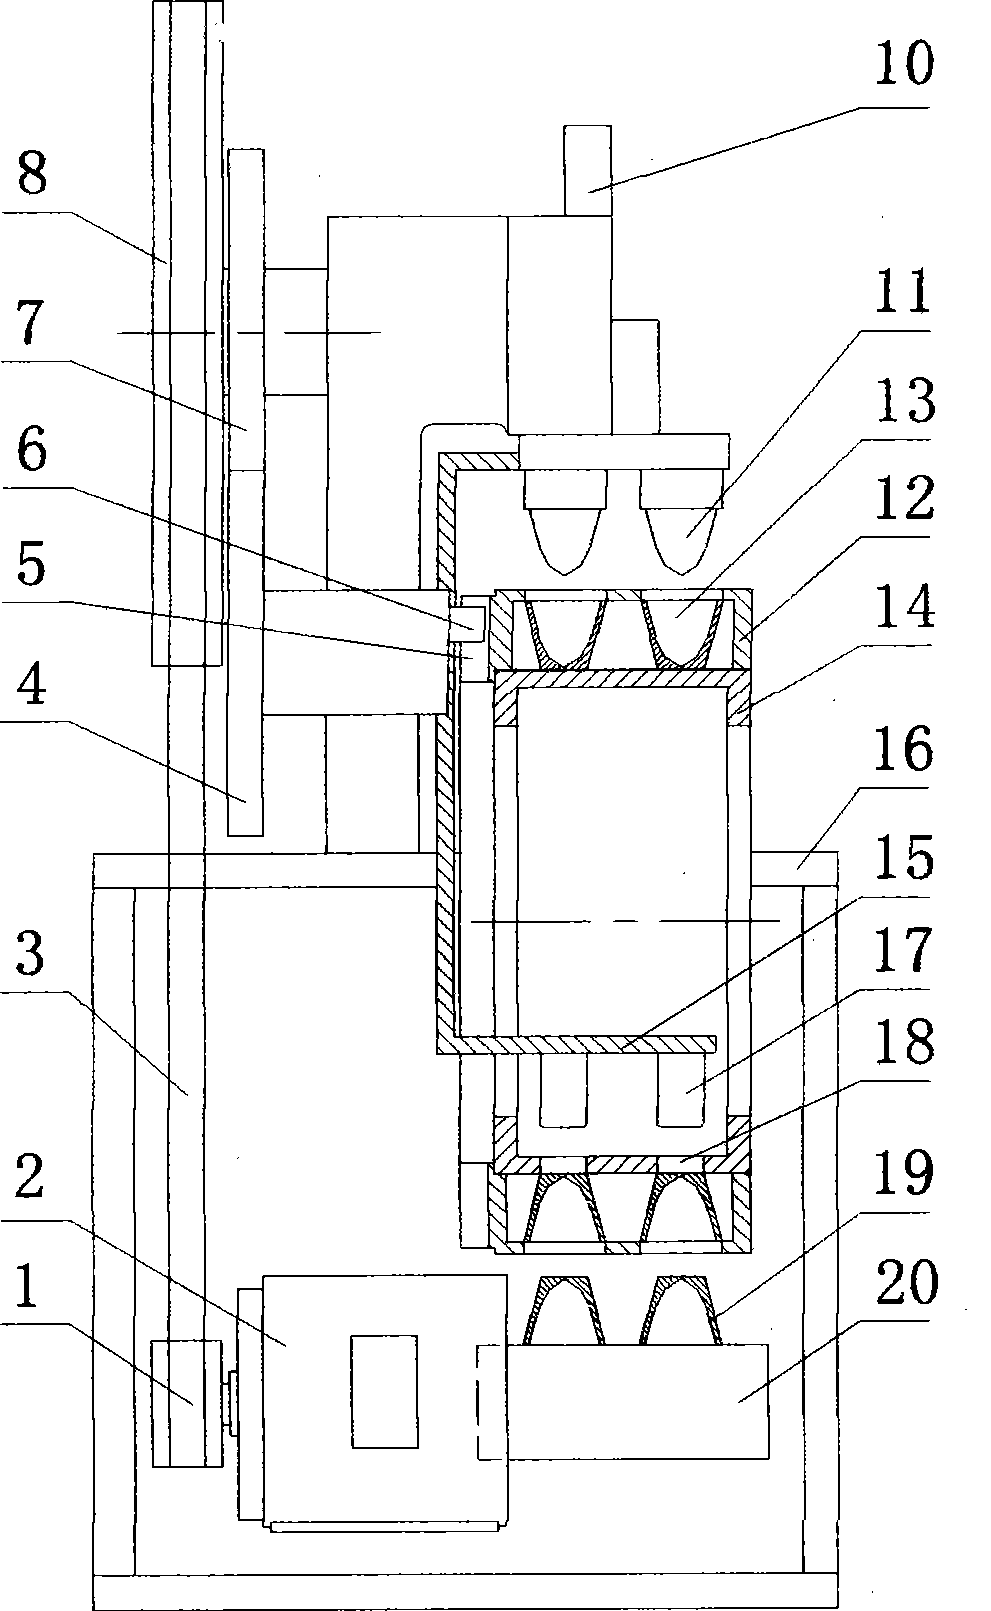 Automatic feeding unit of stamping press